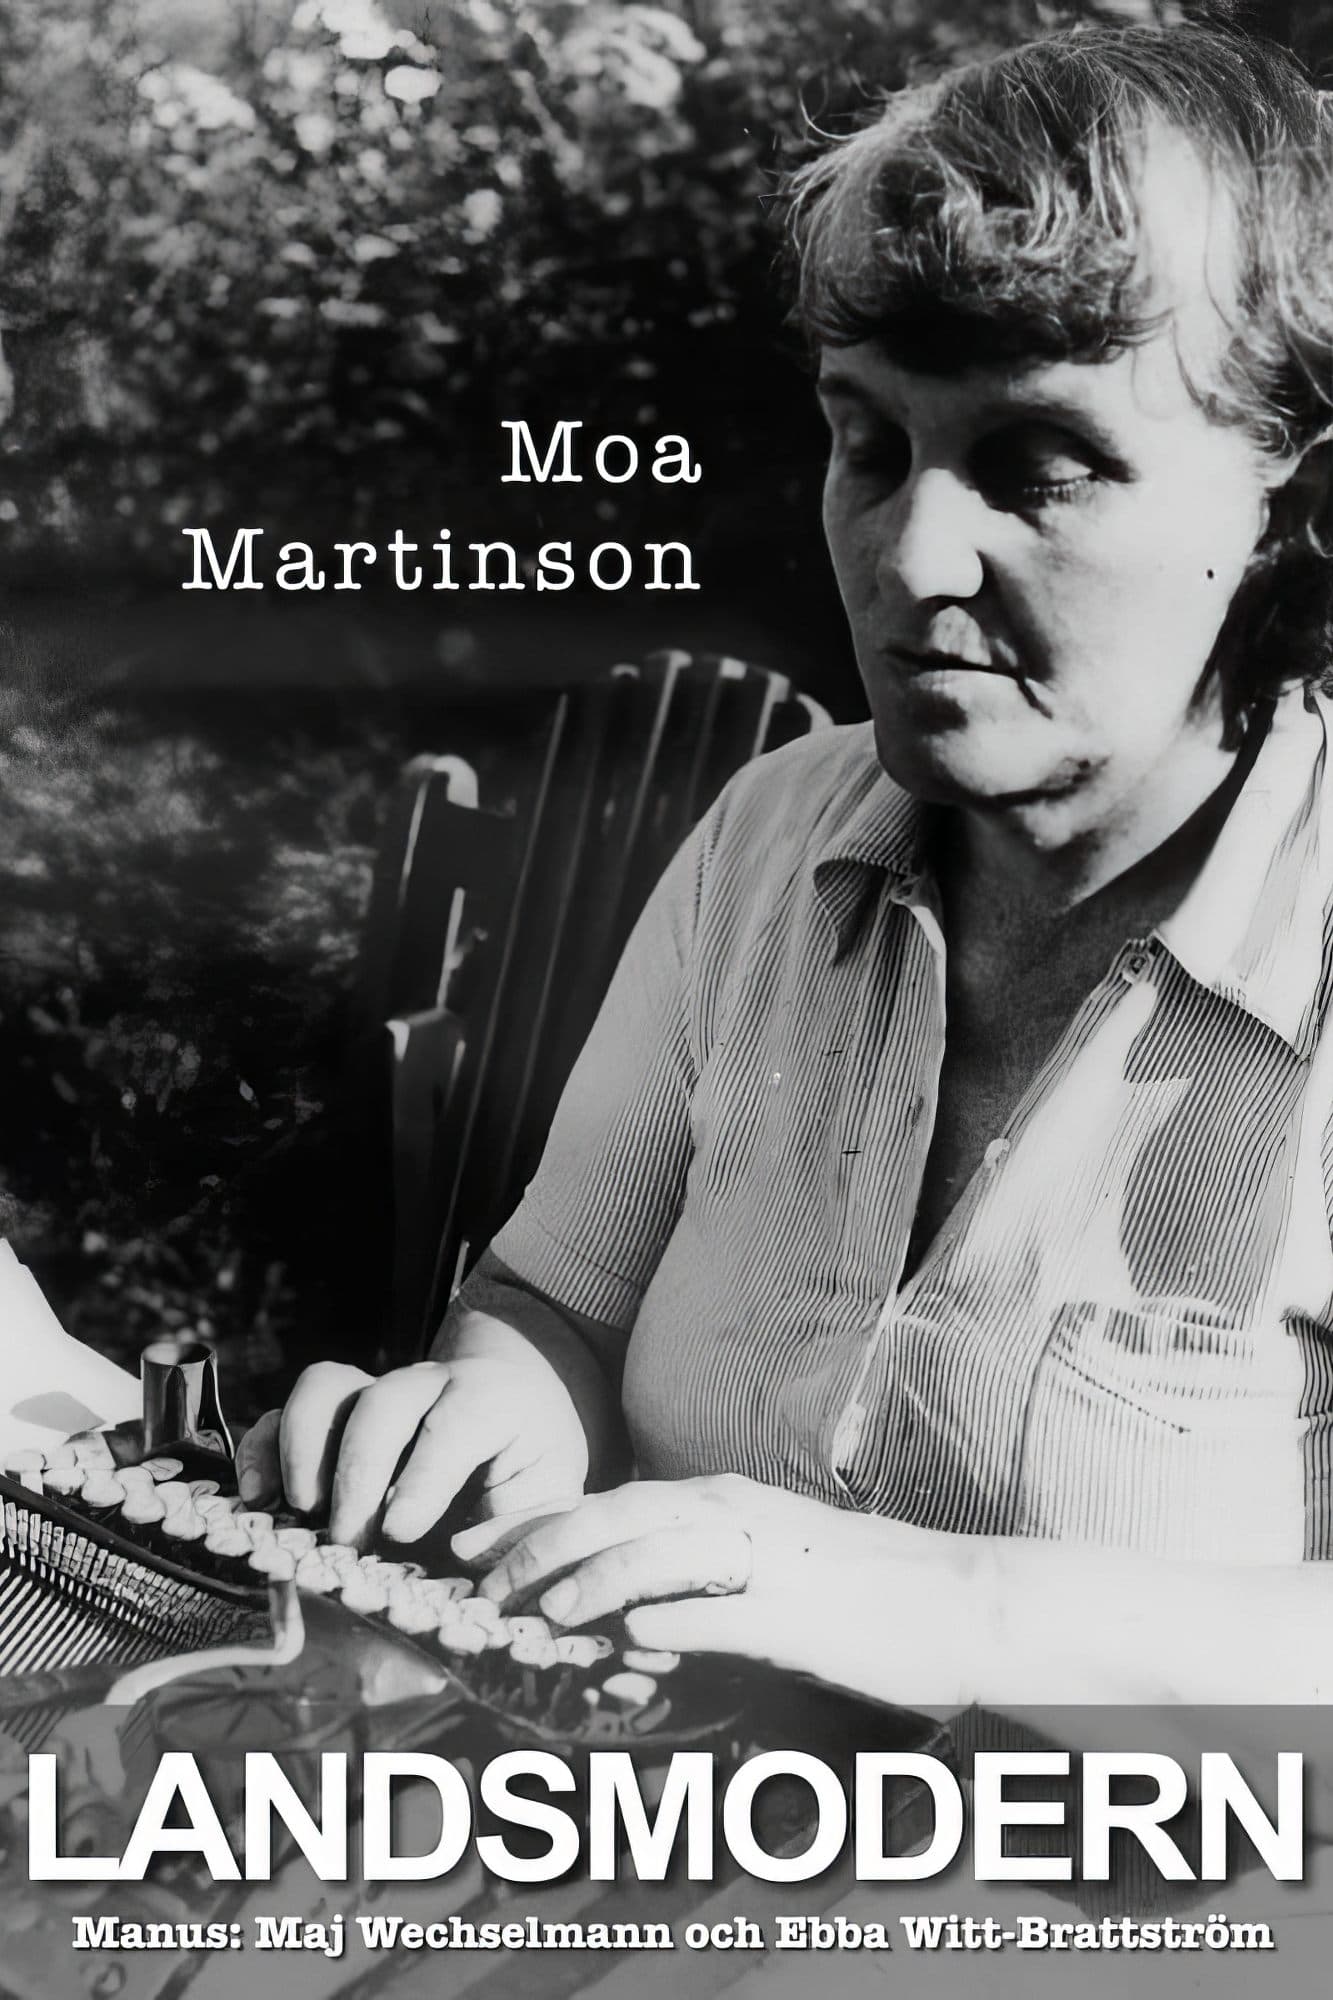 Moa Martinson - Mother of the Country